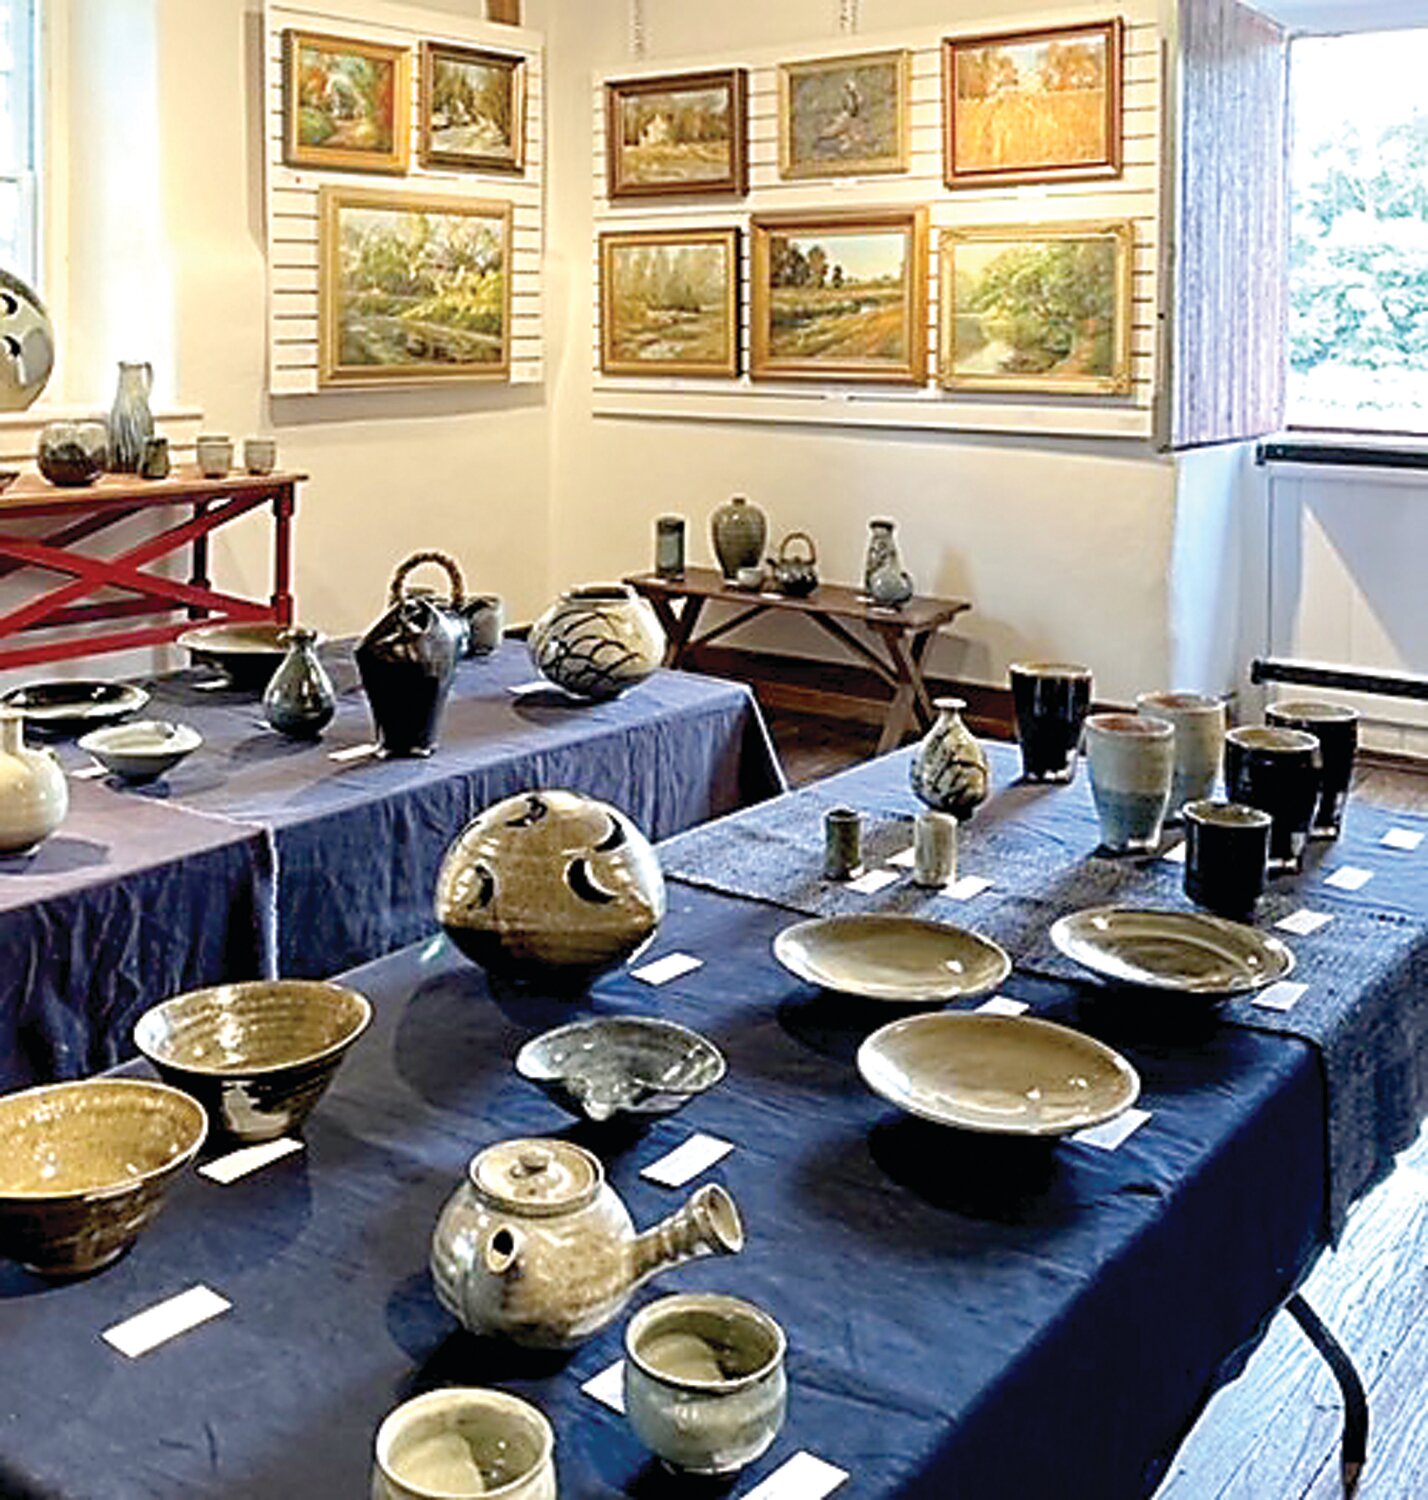 Dot Bunn’s paintings and Willi Singleton’s pottery are on view at the Stover Mill Gallery, weekends in August.